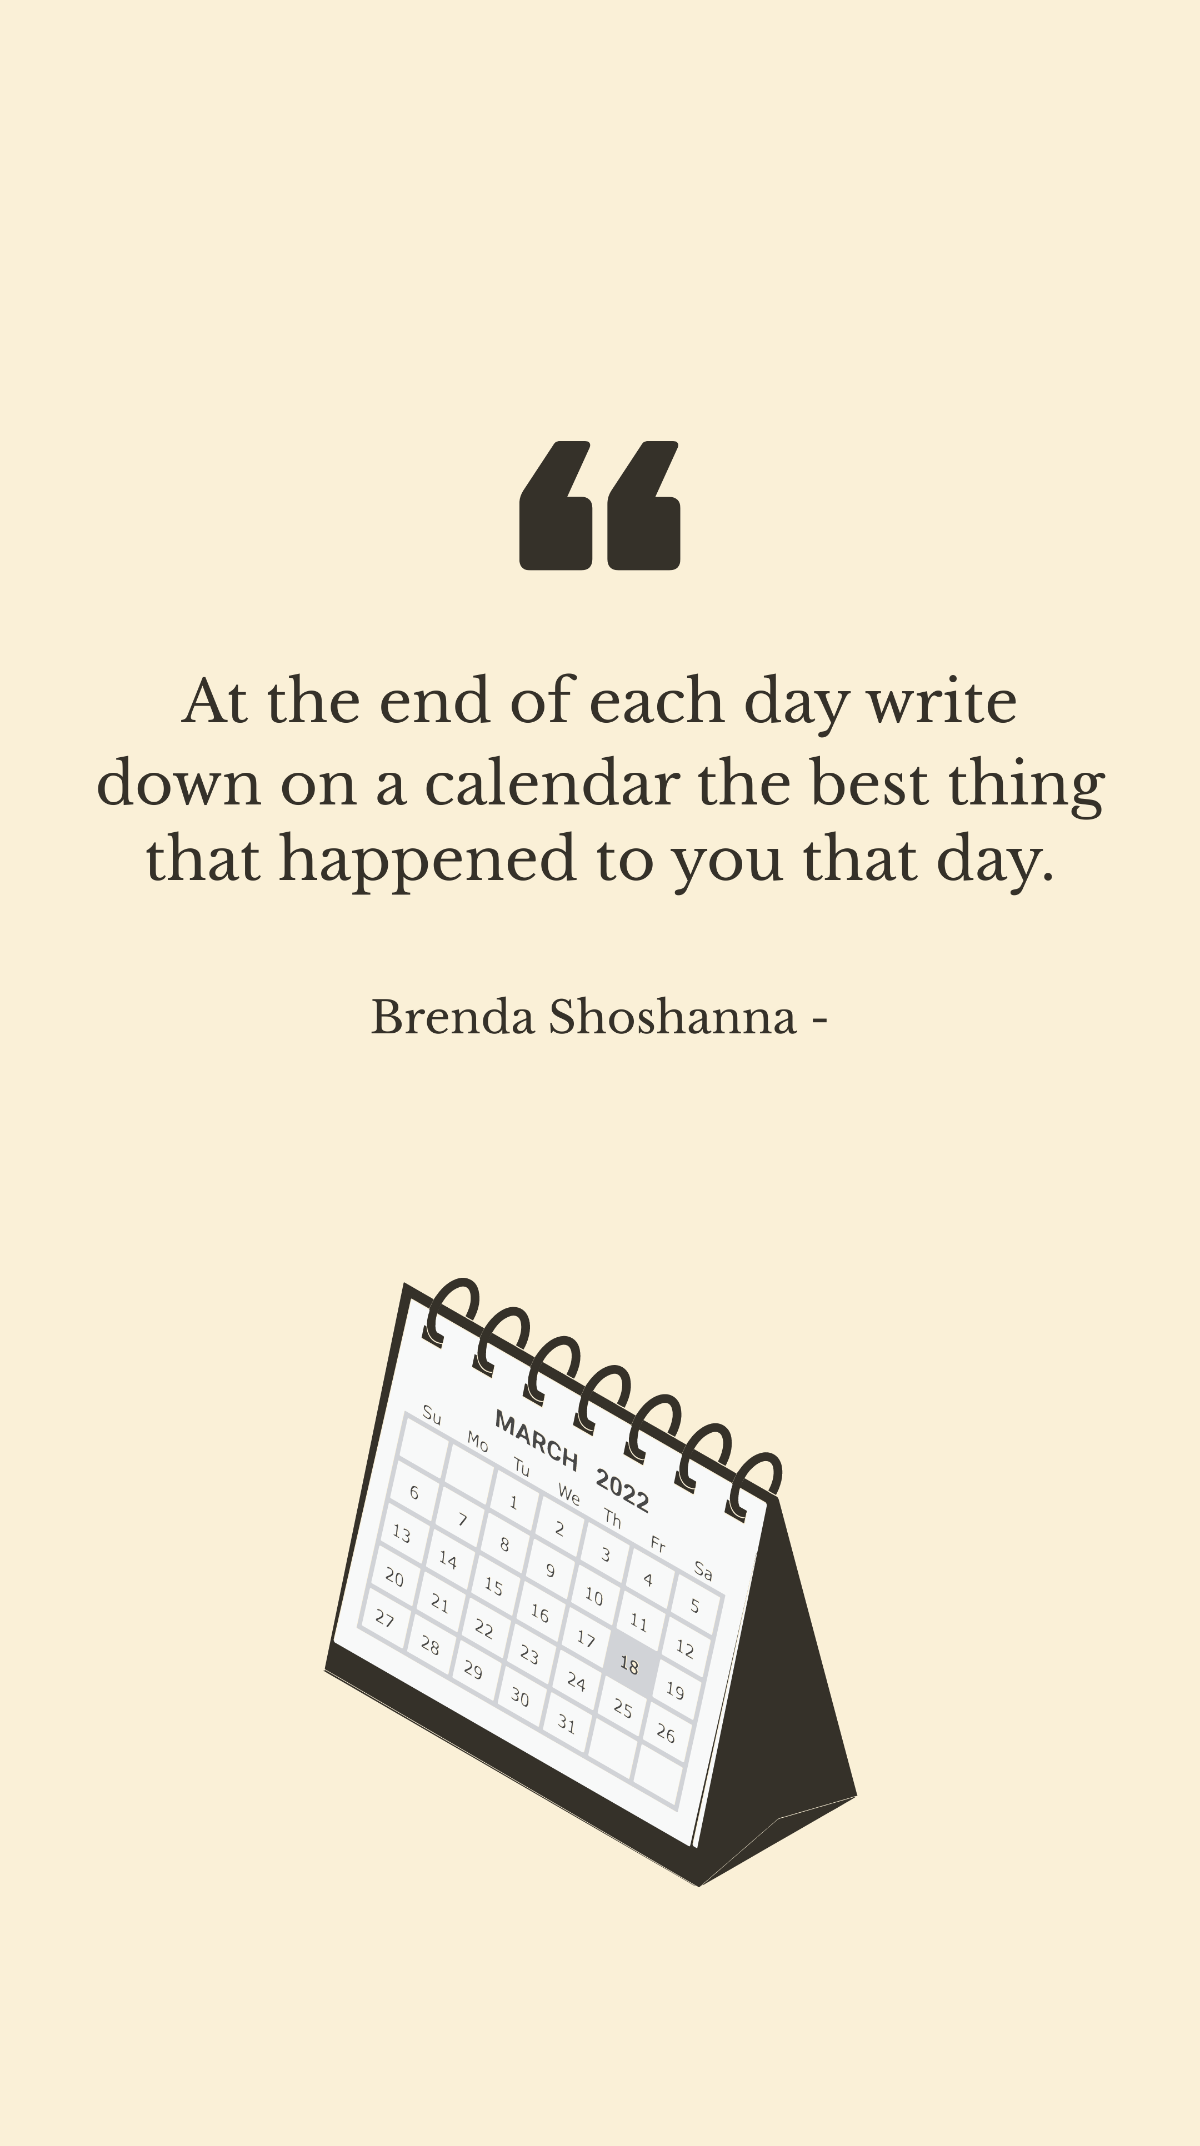 Free Brenda Shoshanna - At the end of each day write down on a calendar the best thing that happened to you that day. Template